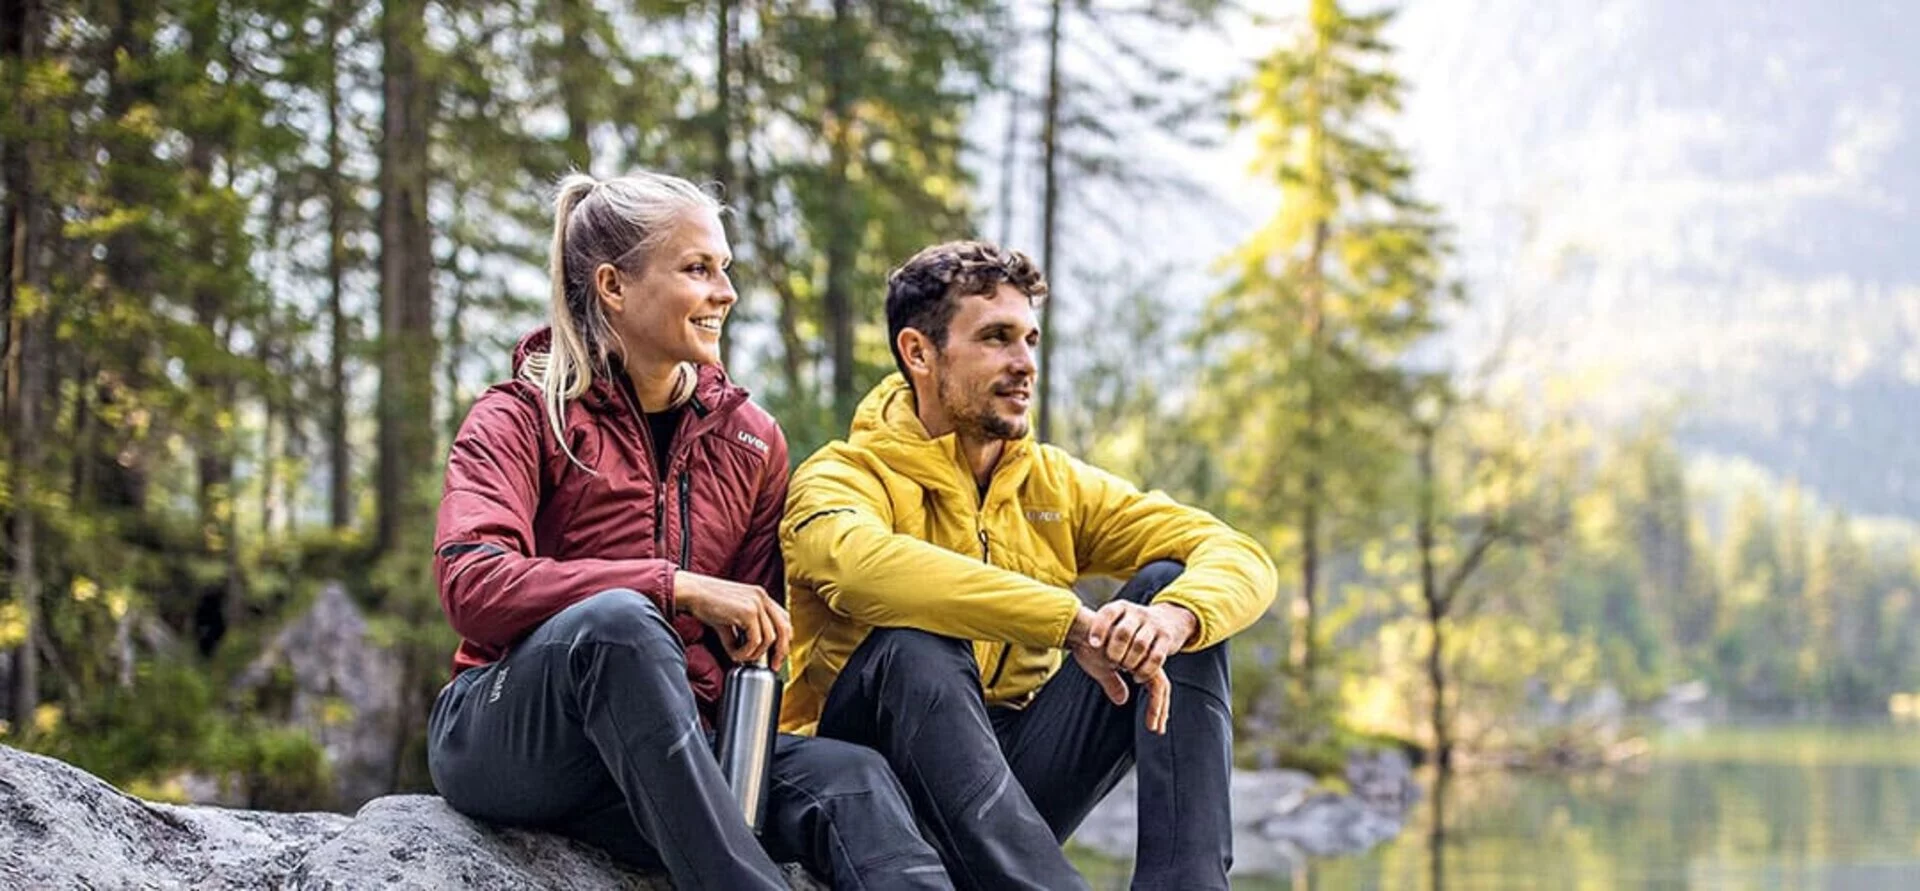 Couple in Outdoor Apparel (uvex-safety.com)